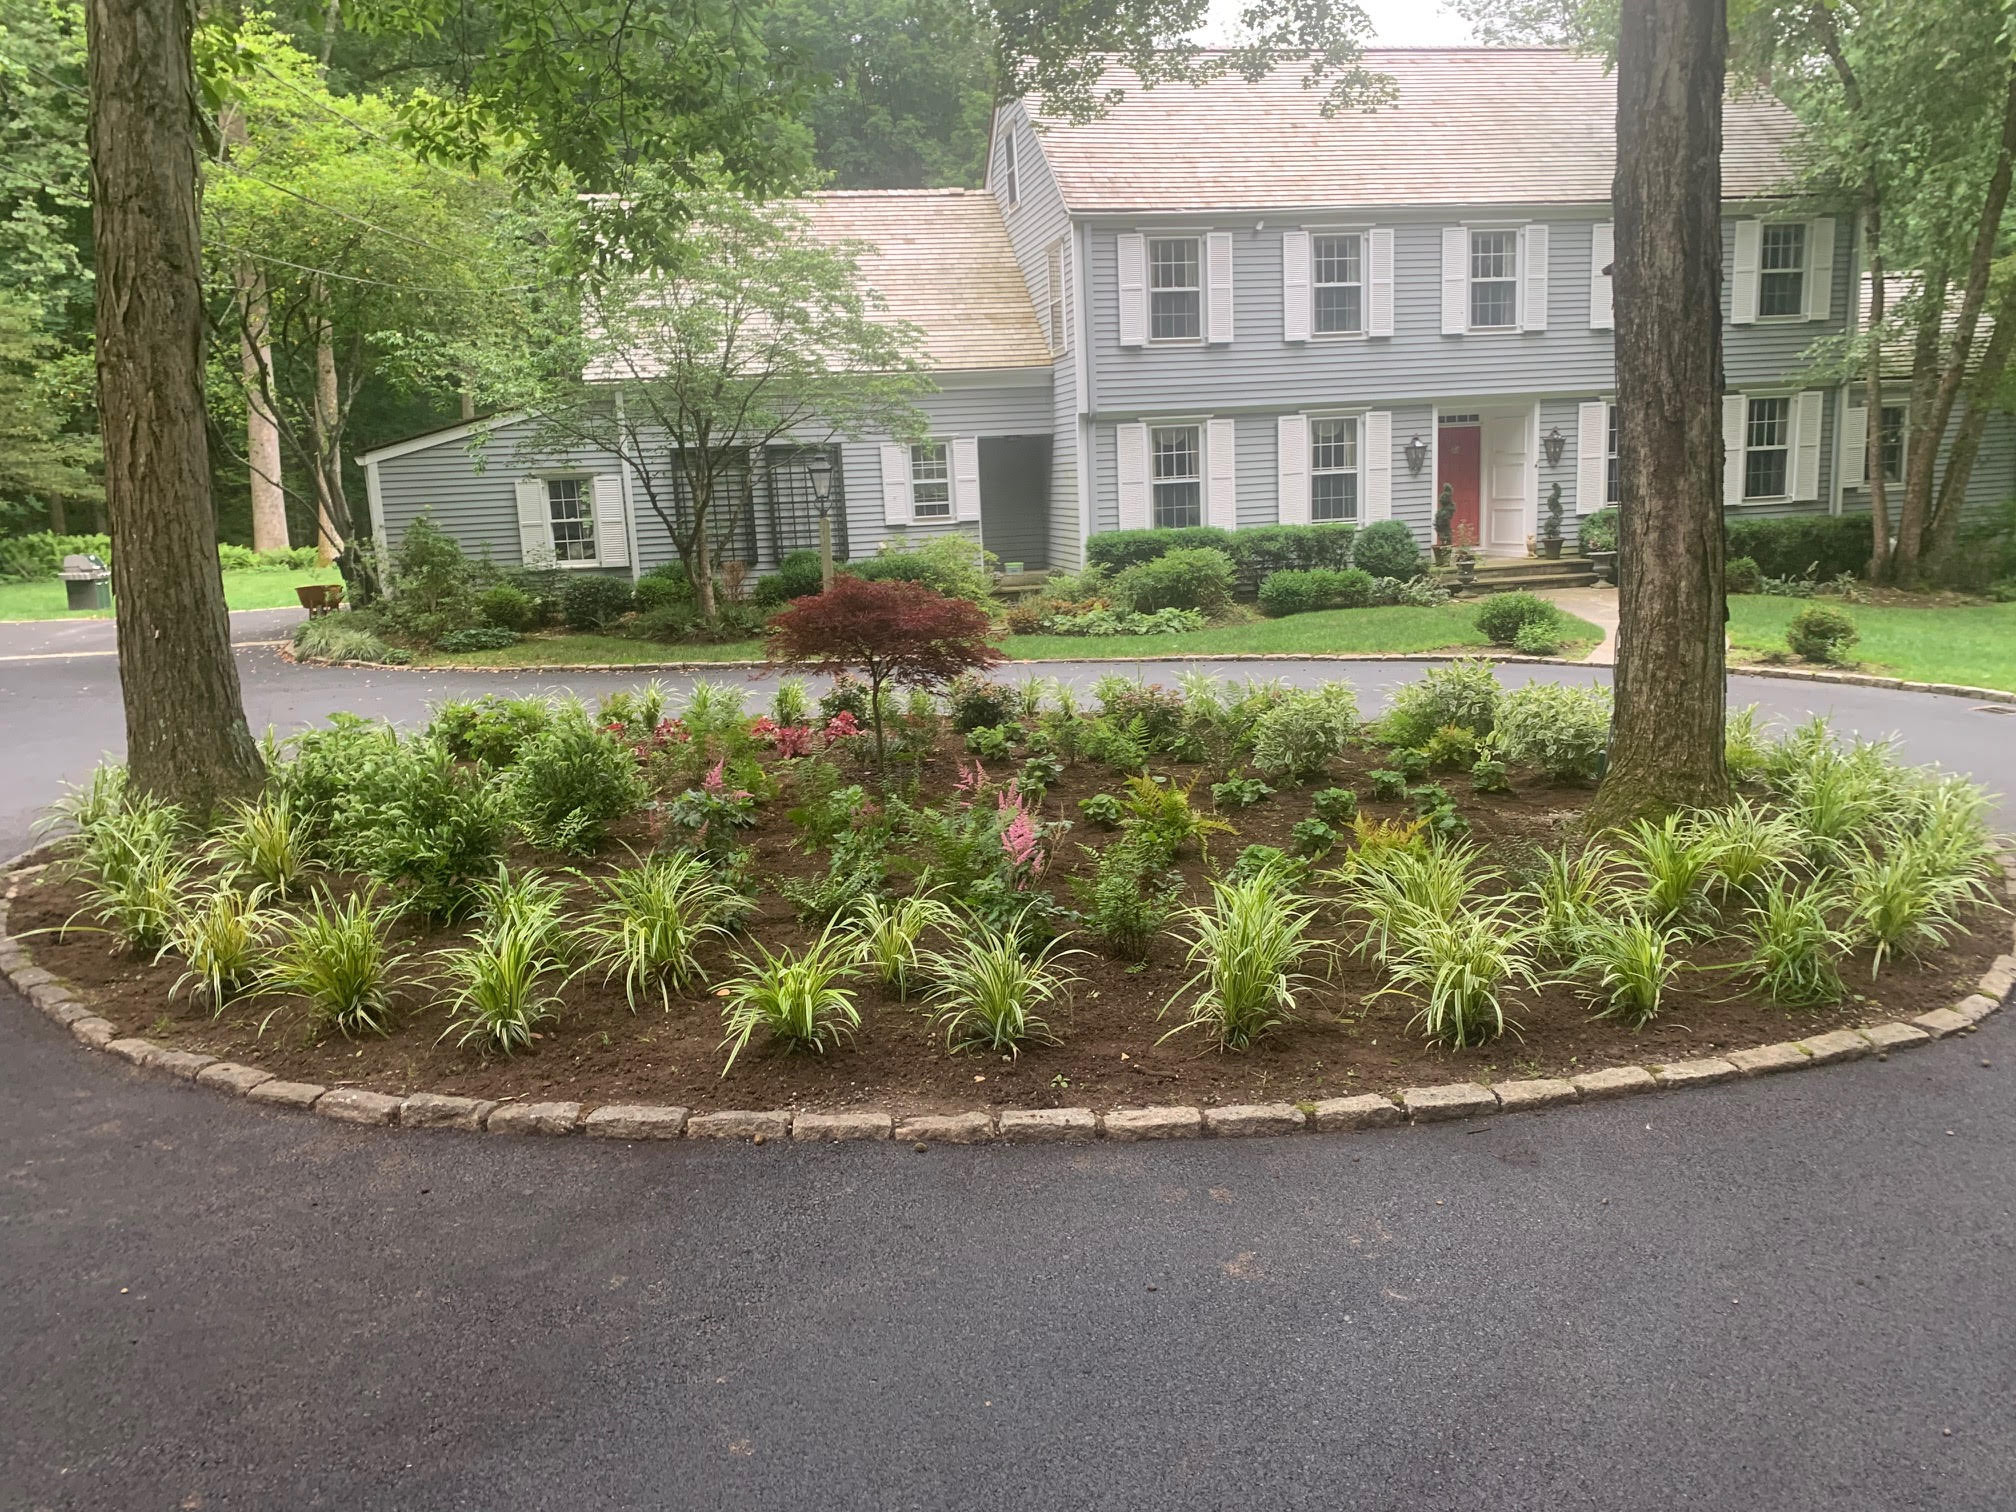 The finished Driveway Circle in Katonah, NY. We planted Dragon Fire Cut Leaf Maple,  Alba Hallow Dogwood, Oak Leaf Hydrangea, Clethra, Variegated Liriope, Mixed woodland perennials. Design, Plant by P